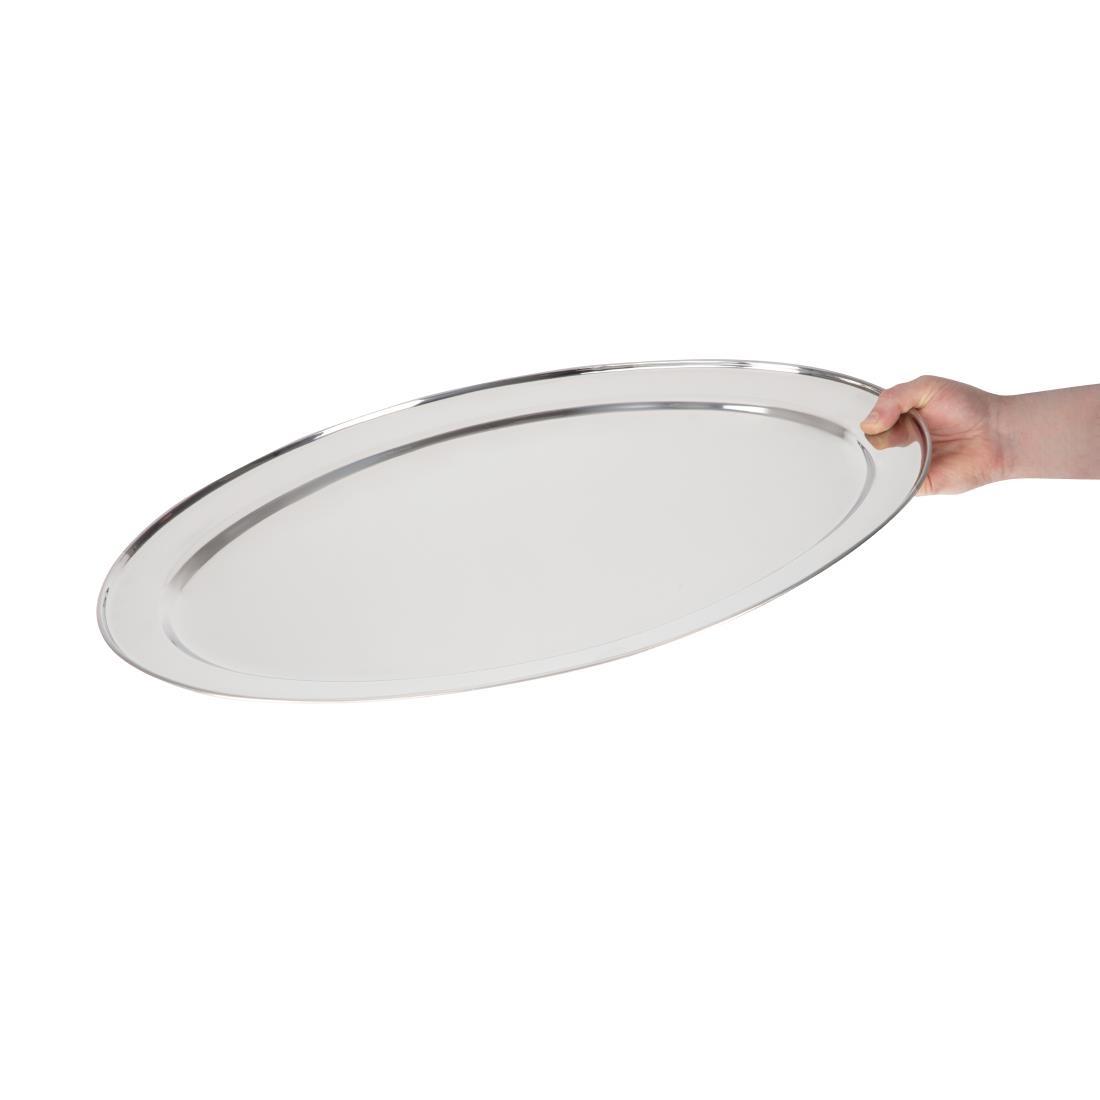 Olympia Stainless Steel Oval Serving Tray 200mm - K360  - 5